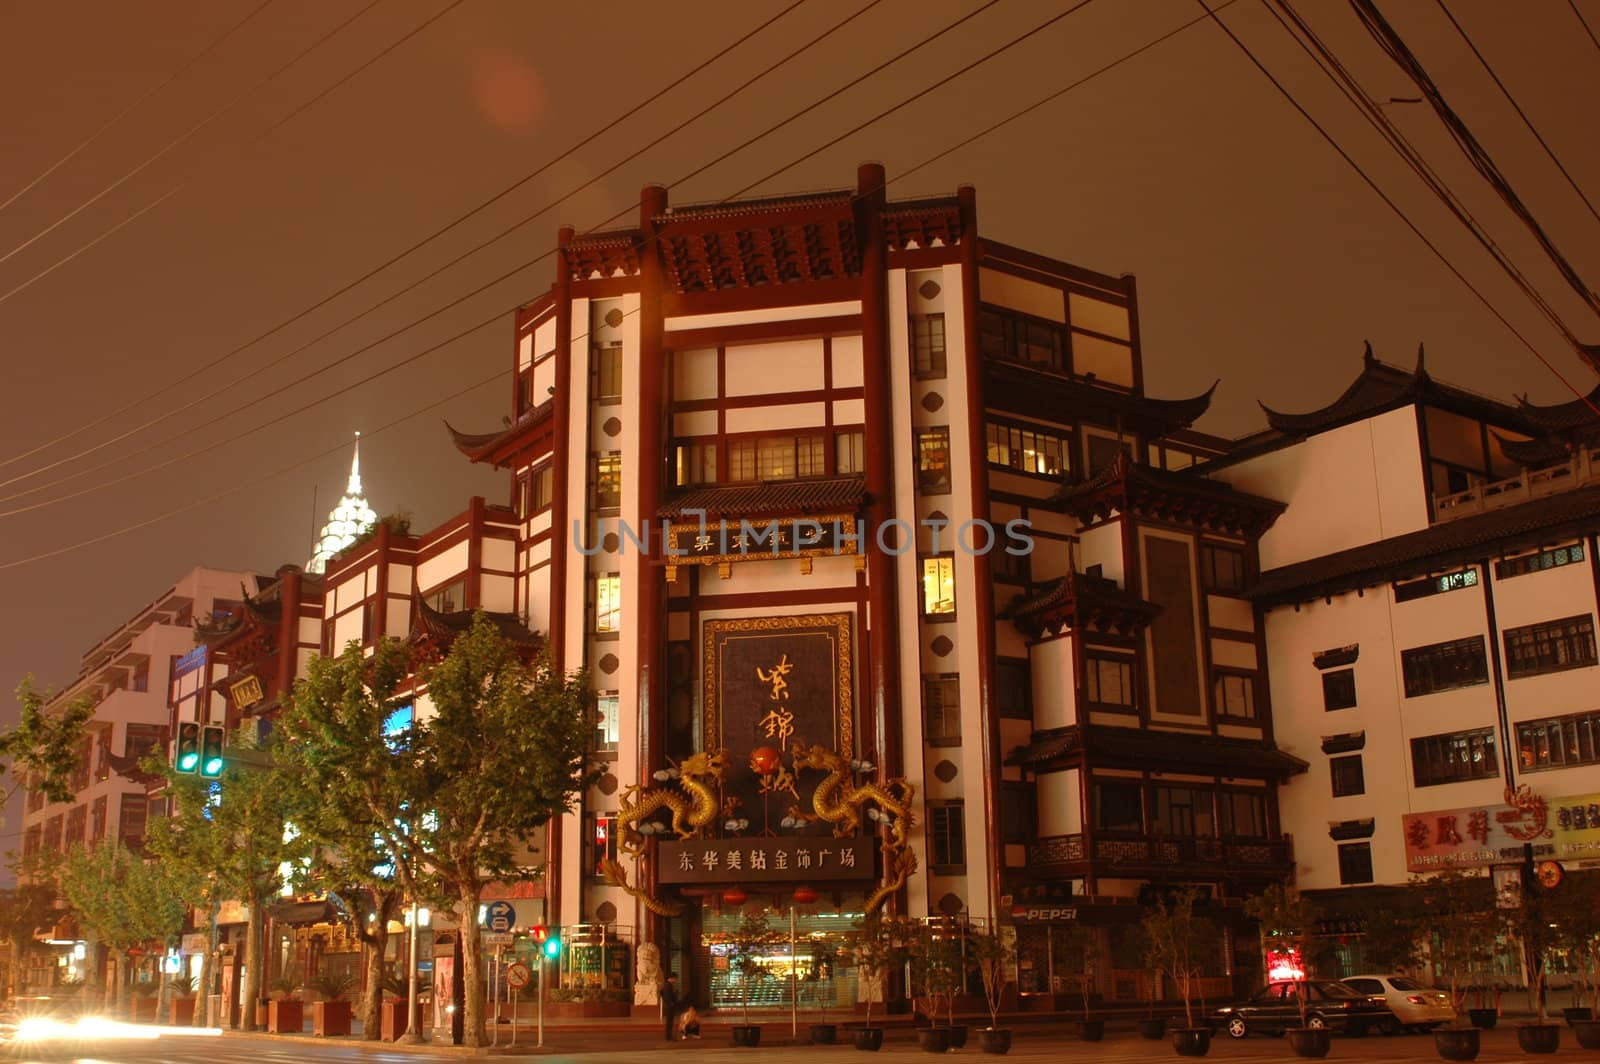 Old town YuYuan, called also Cheng Huang Miao in Shanghai, China. Famous traditional architecture.